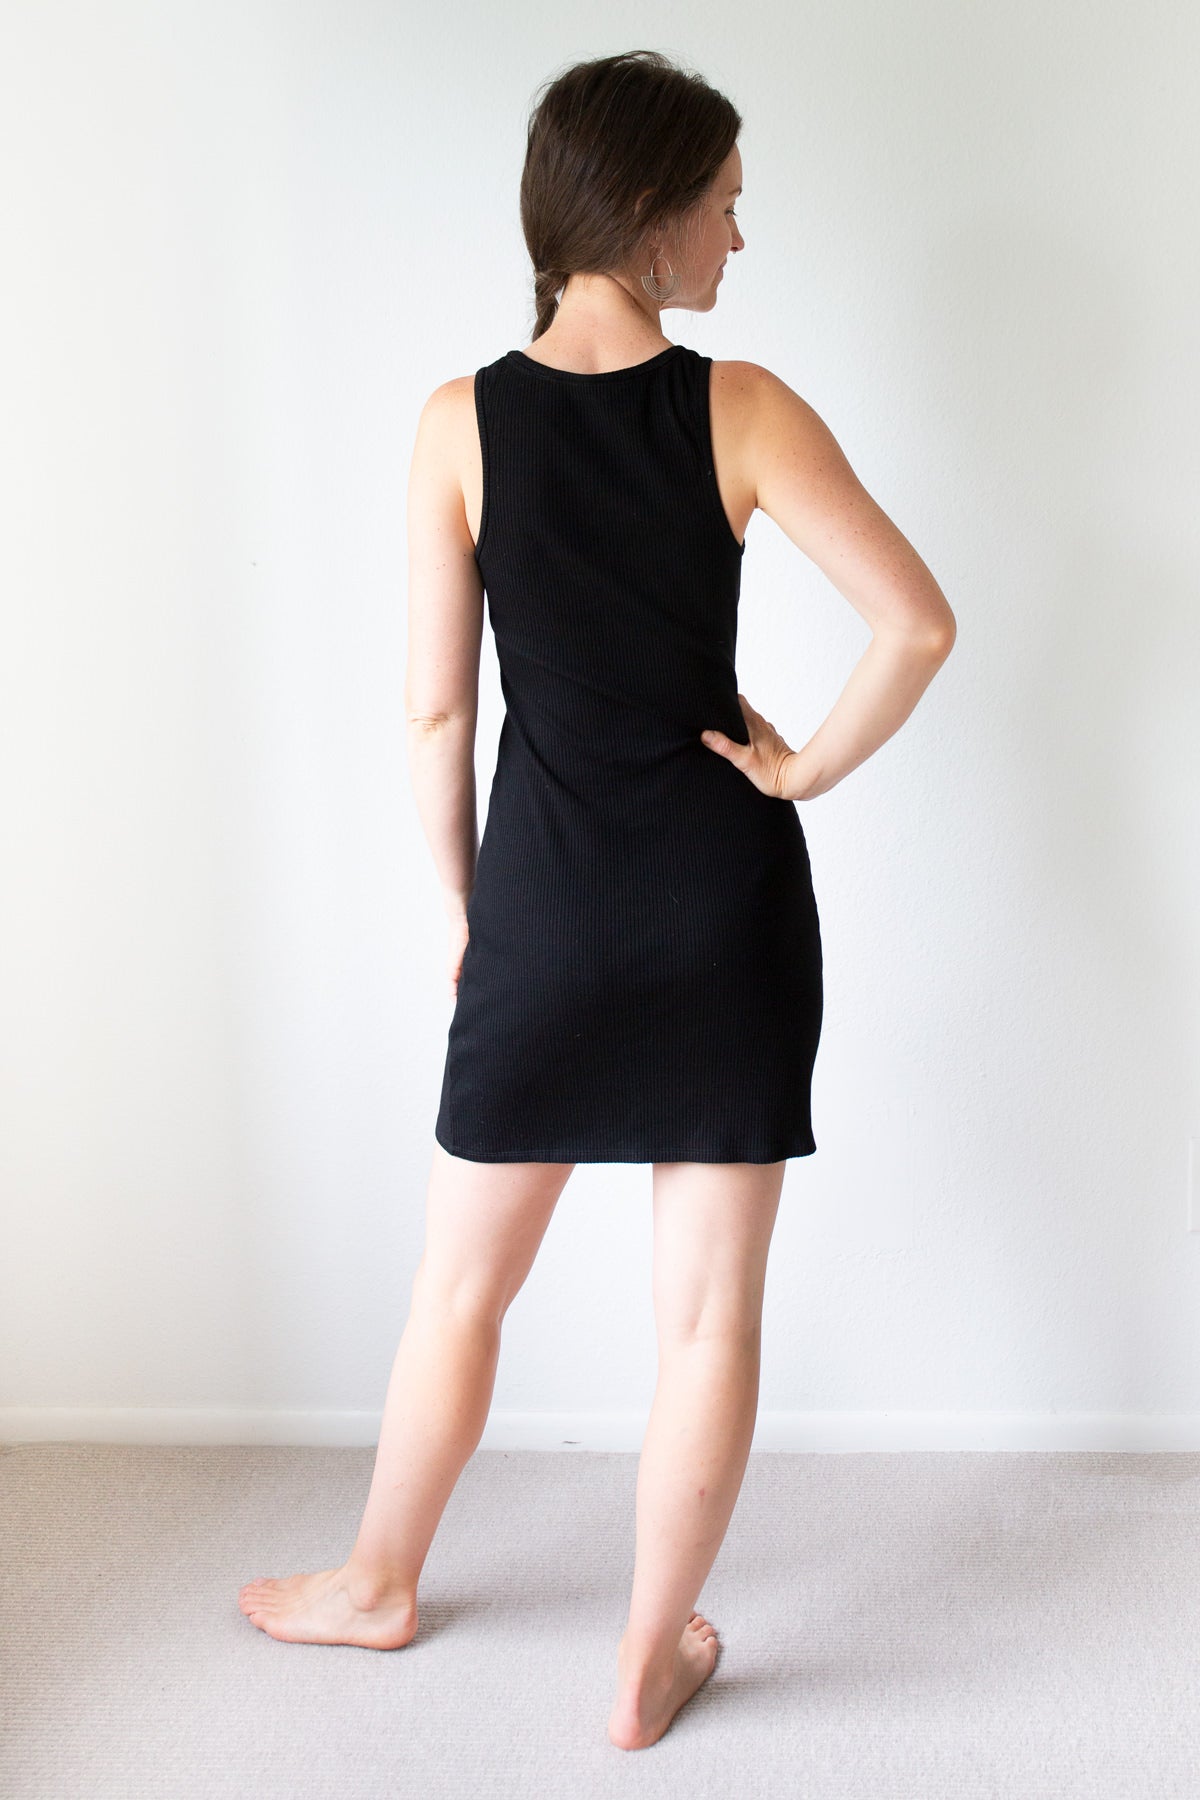 How to Sew a Kila Dress – Allie Olson Sewing Patterns